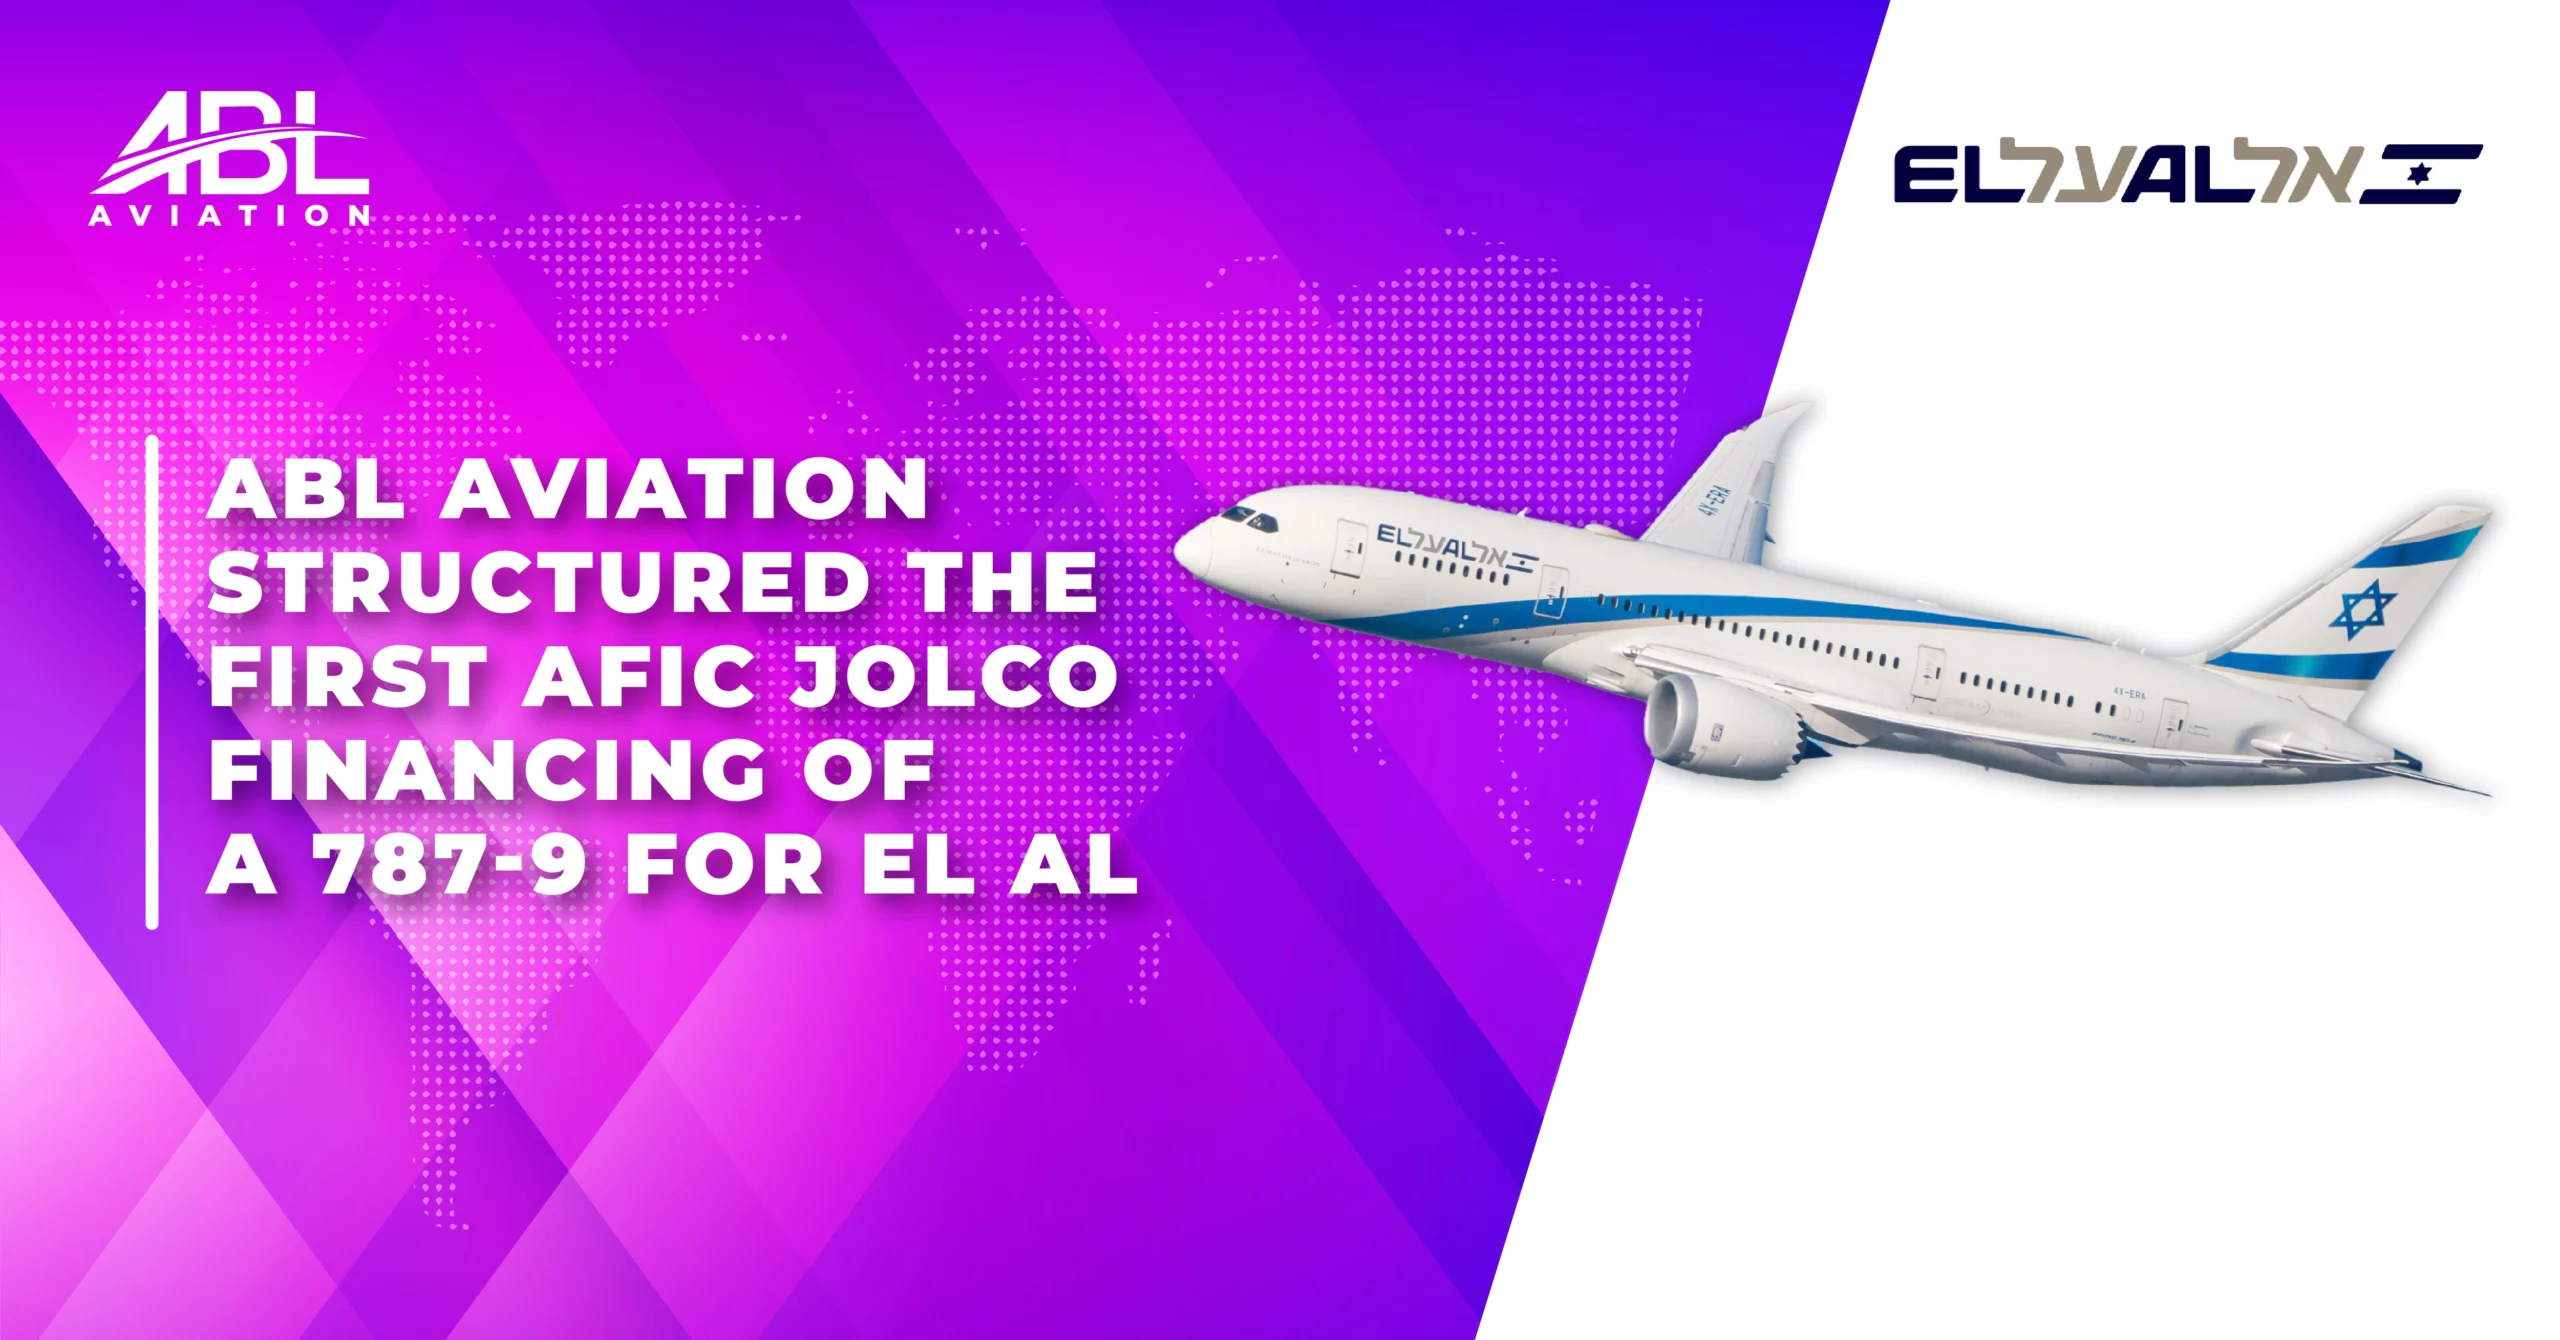 ABL Aviation Structured the First AFIC JOLCO Financing of a 787-9 for EL AL